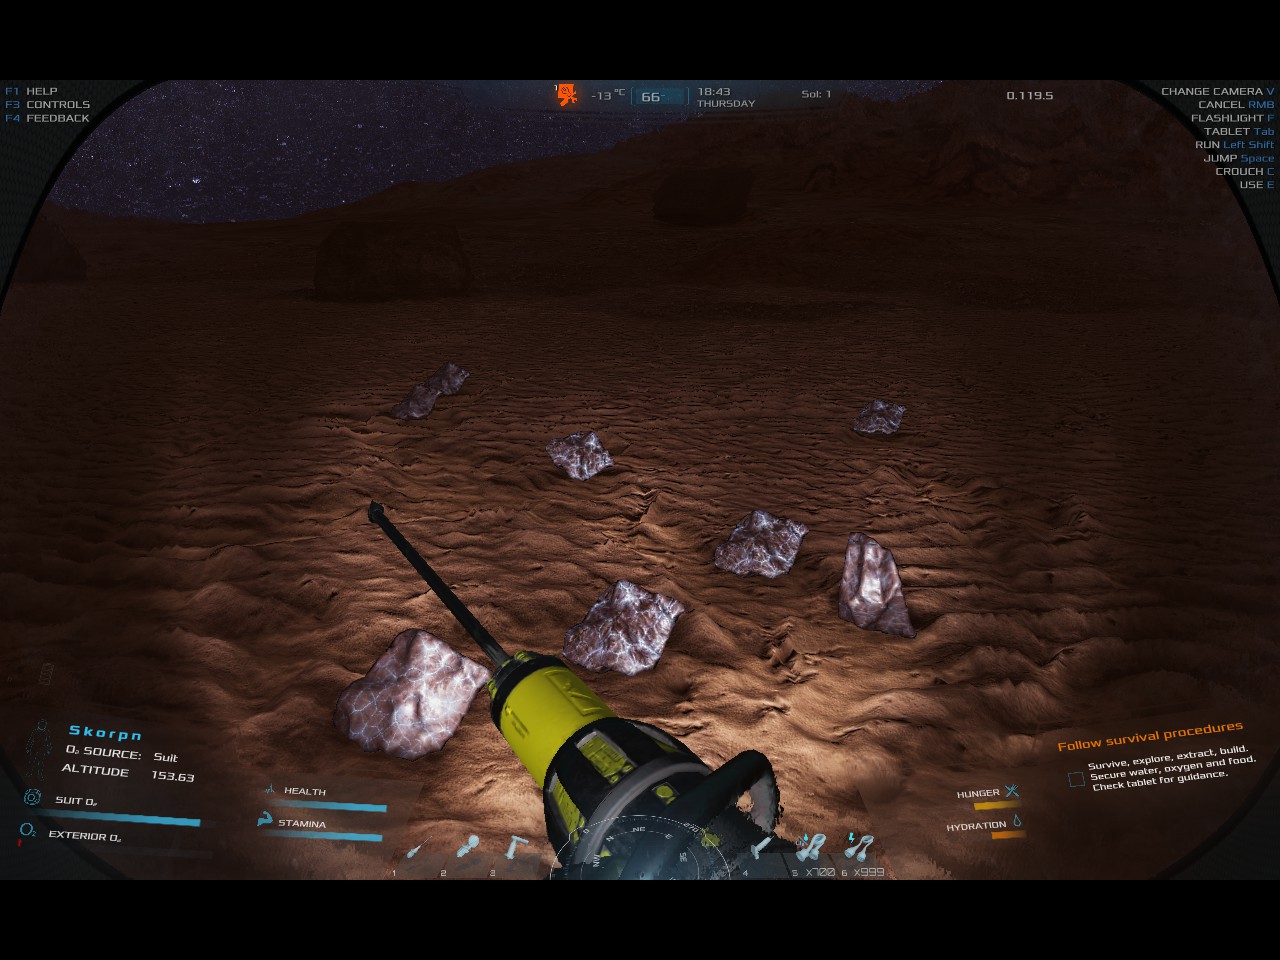 Occupy Mars: The Game - Basic crafting and walkthroughs - First (Or Second) Steps On Mars & Ore Collecting - 6C65D26